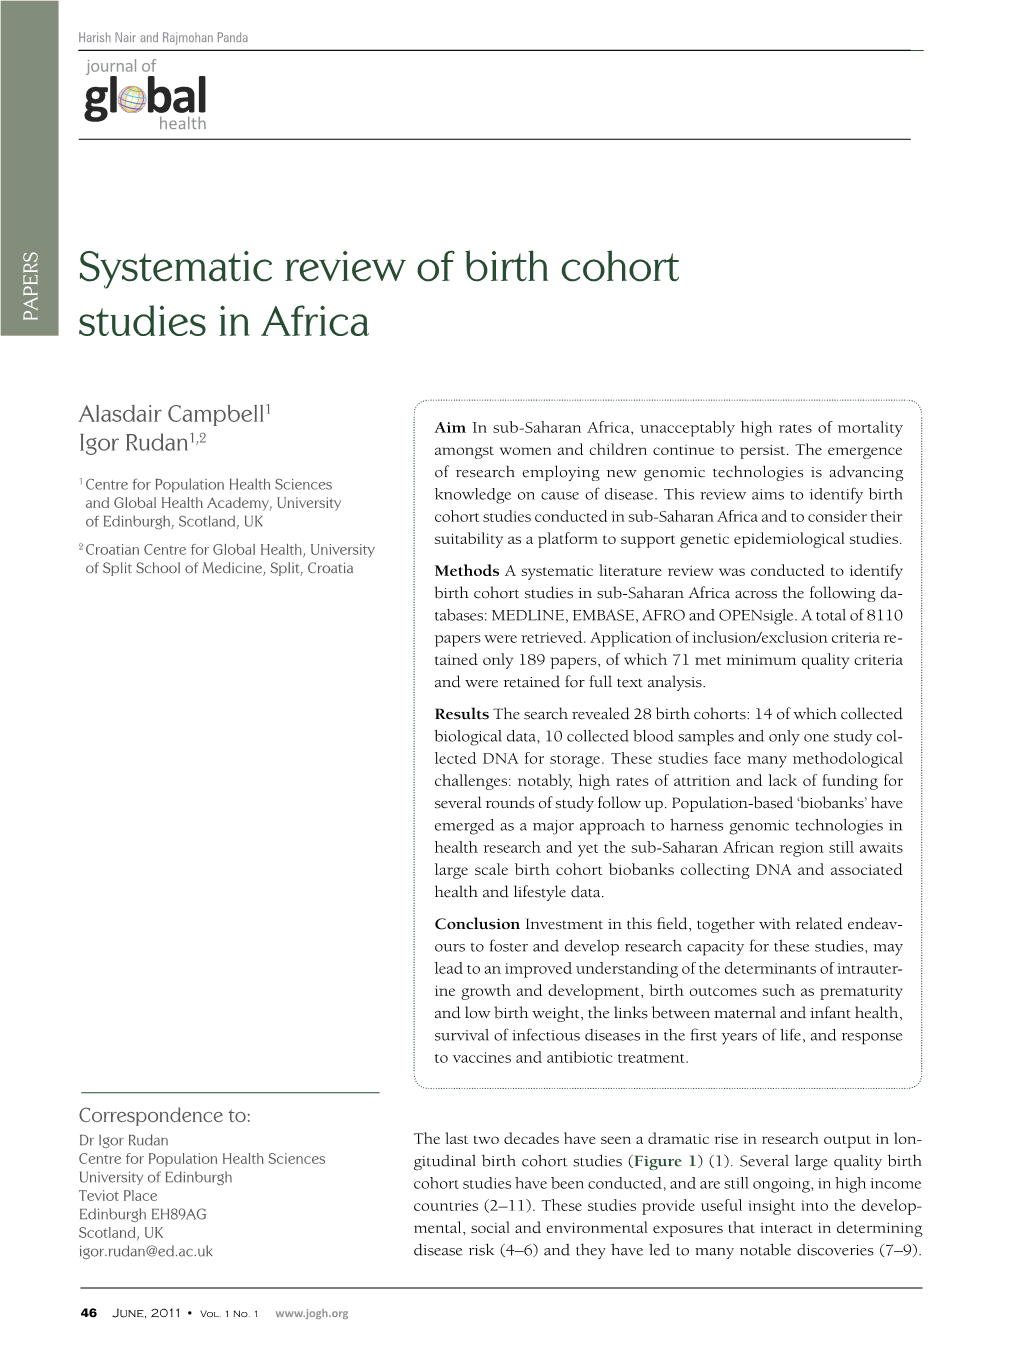 Systematic Review of Birth Cohort Studies in Africa